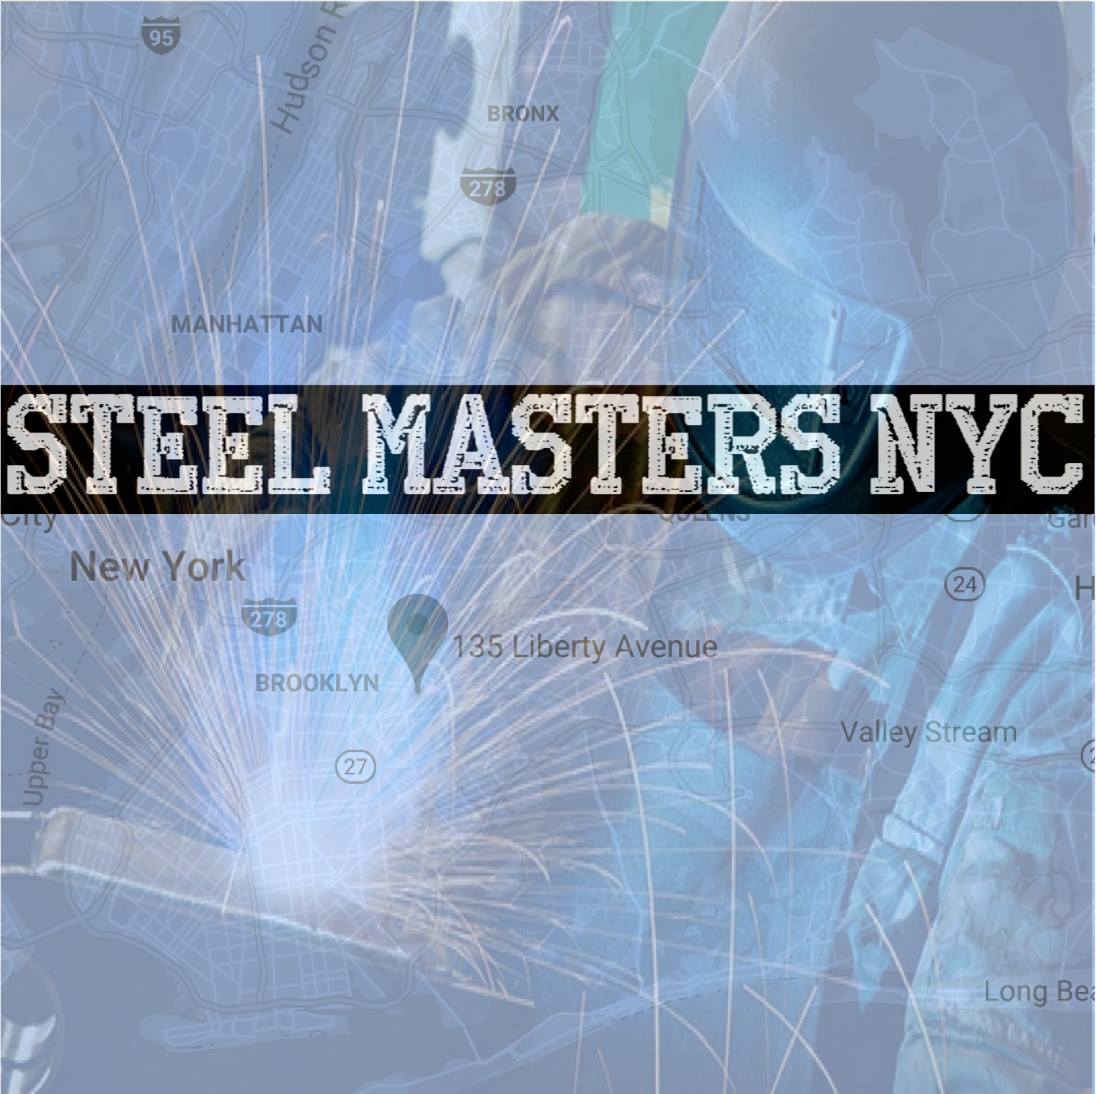 Steel Masters NYC Offers A Variety of Steel, Iron, and Metal Services